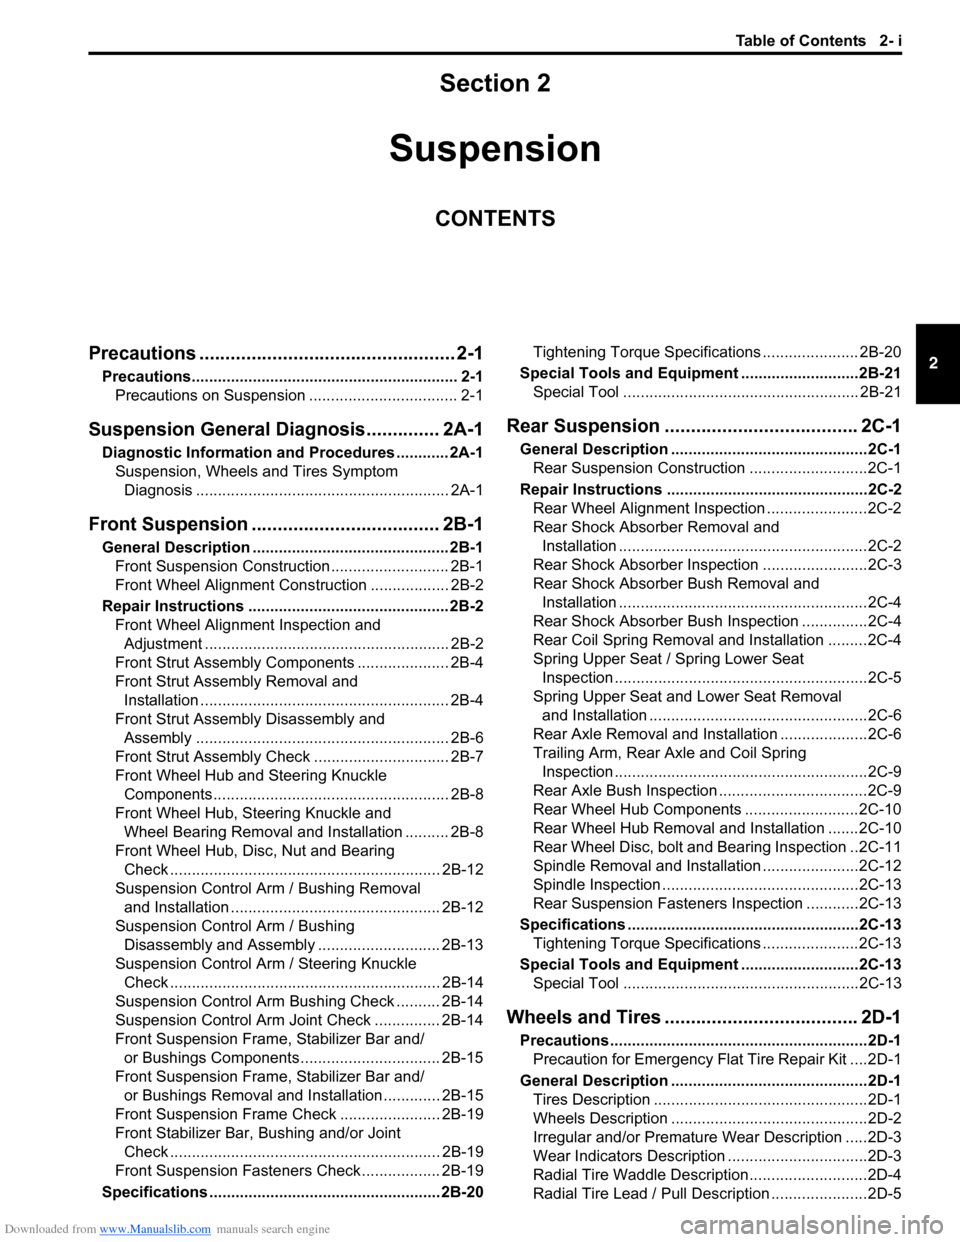 SUZUKI SWIFT 2004 2.G Service User Guide Downloaded from www.Manualslib.com manuals search engine Table of Contents 2- i
2
Section 2
CONTENTS
Suspension
Precautions ................................................. 2-1
Precautions...........